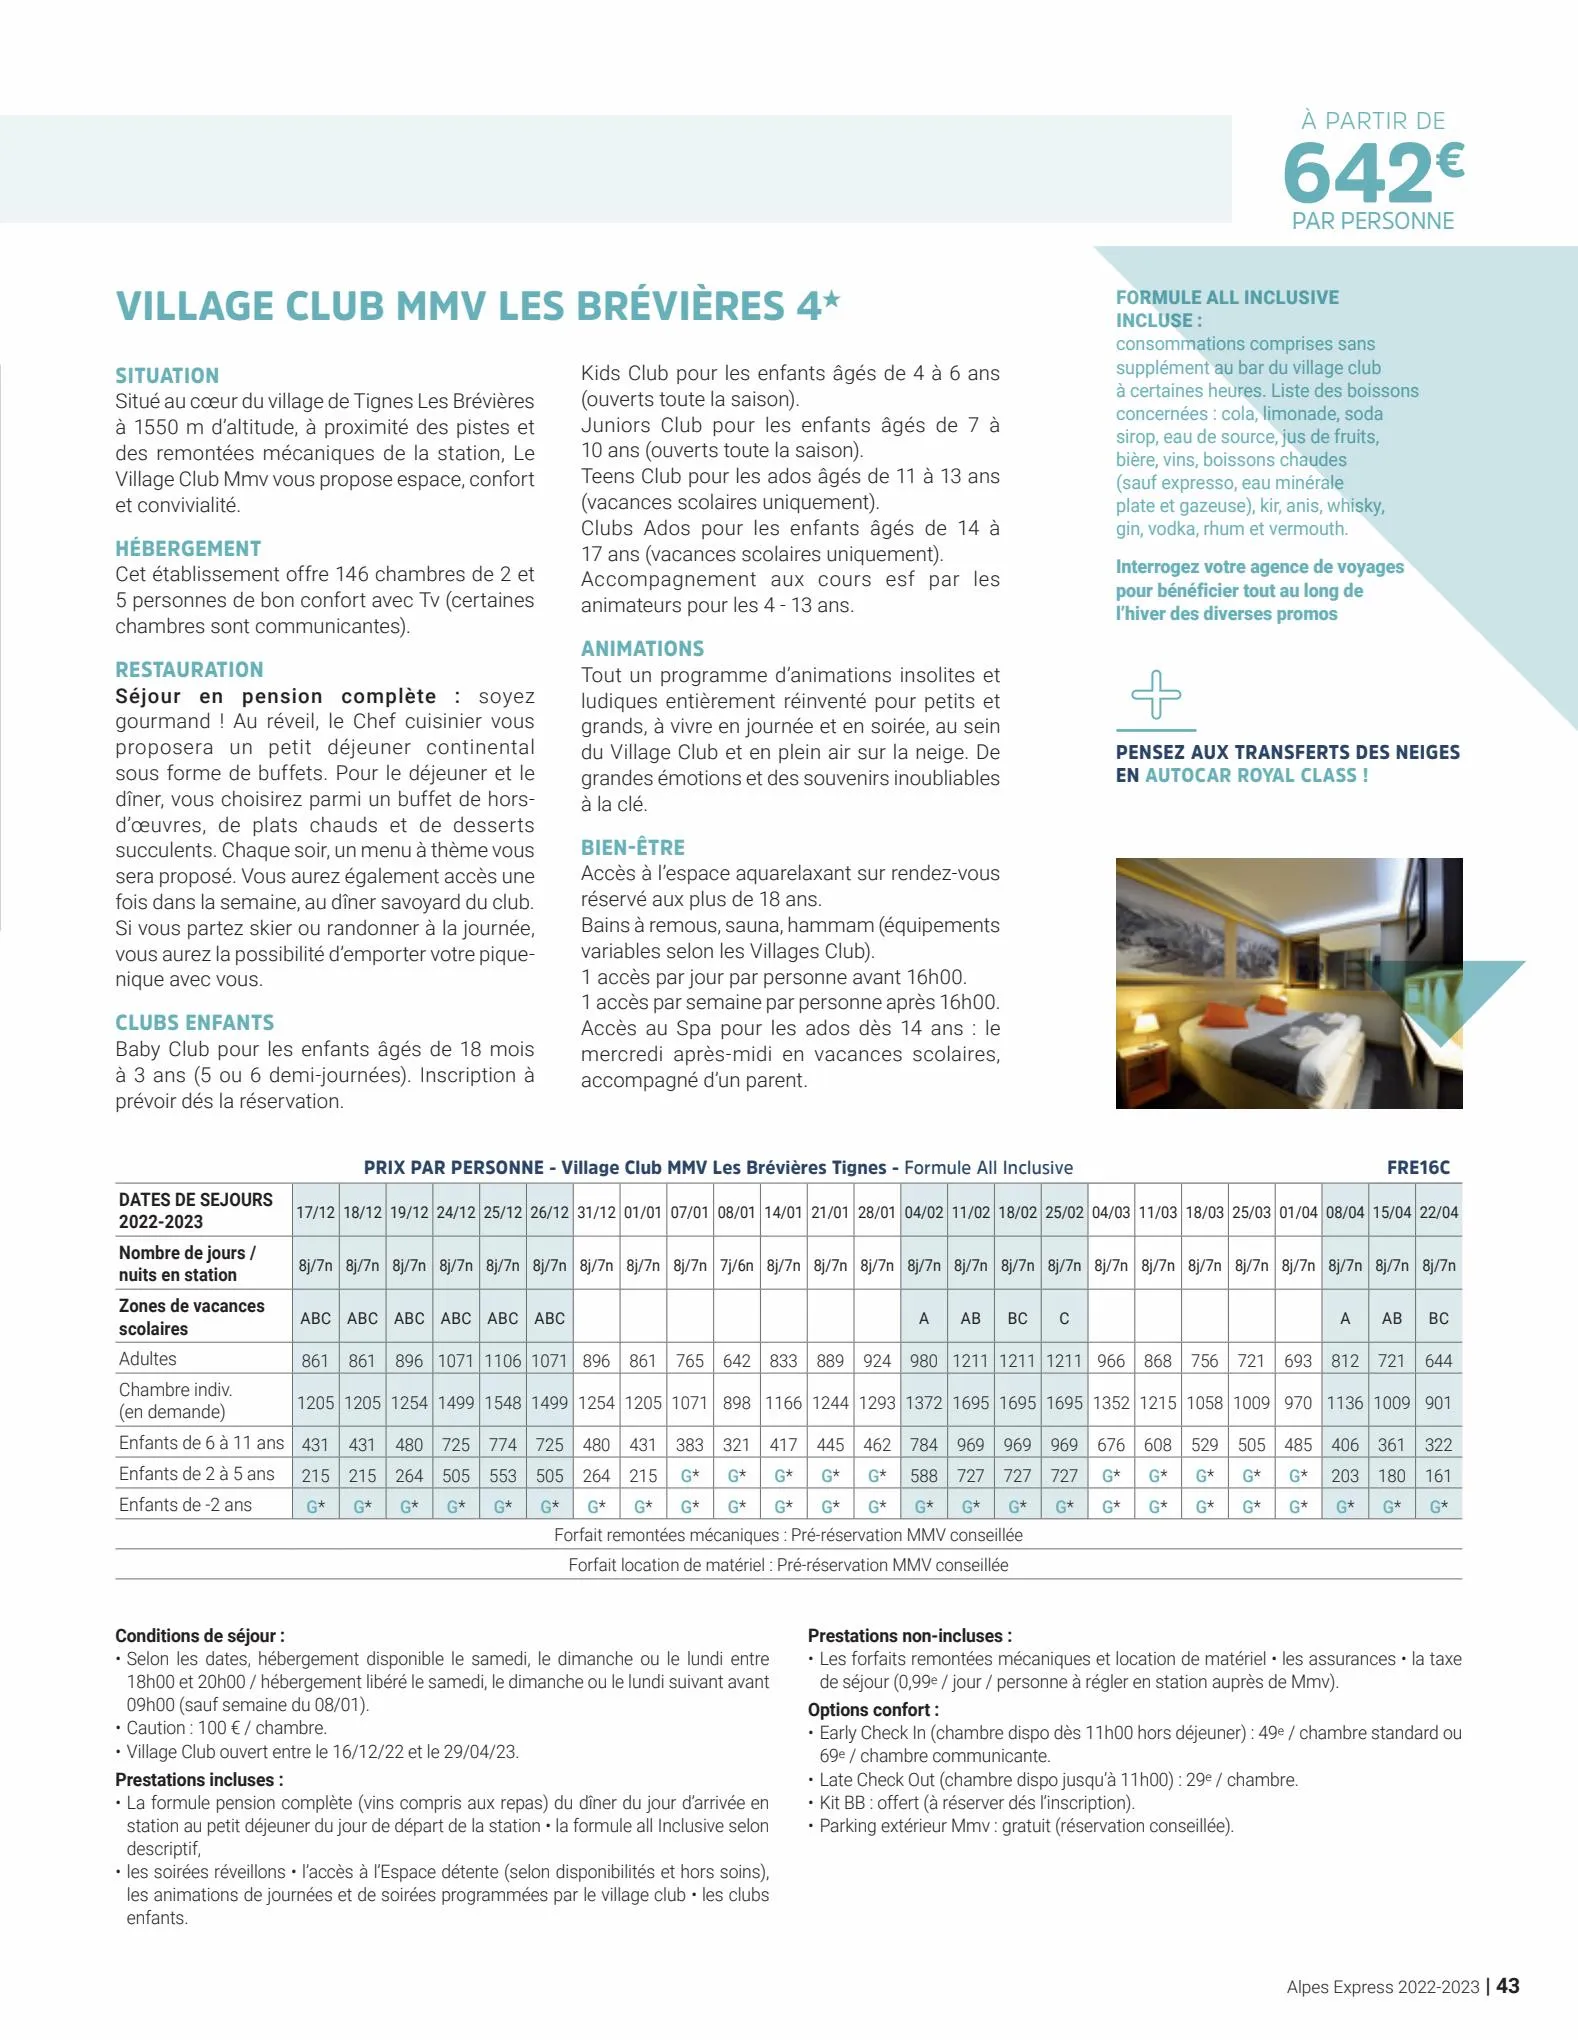 Catalogue Alpes Express - Hiver 2022-2023, page 00043